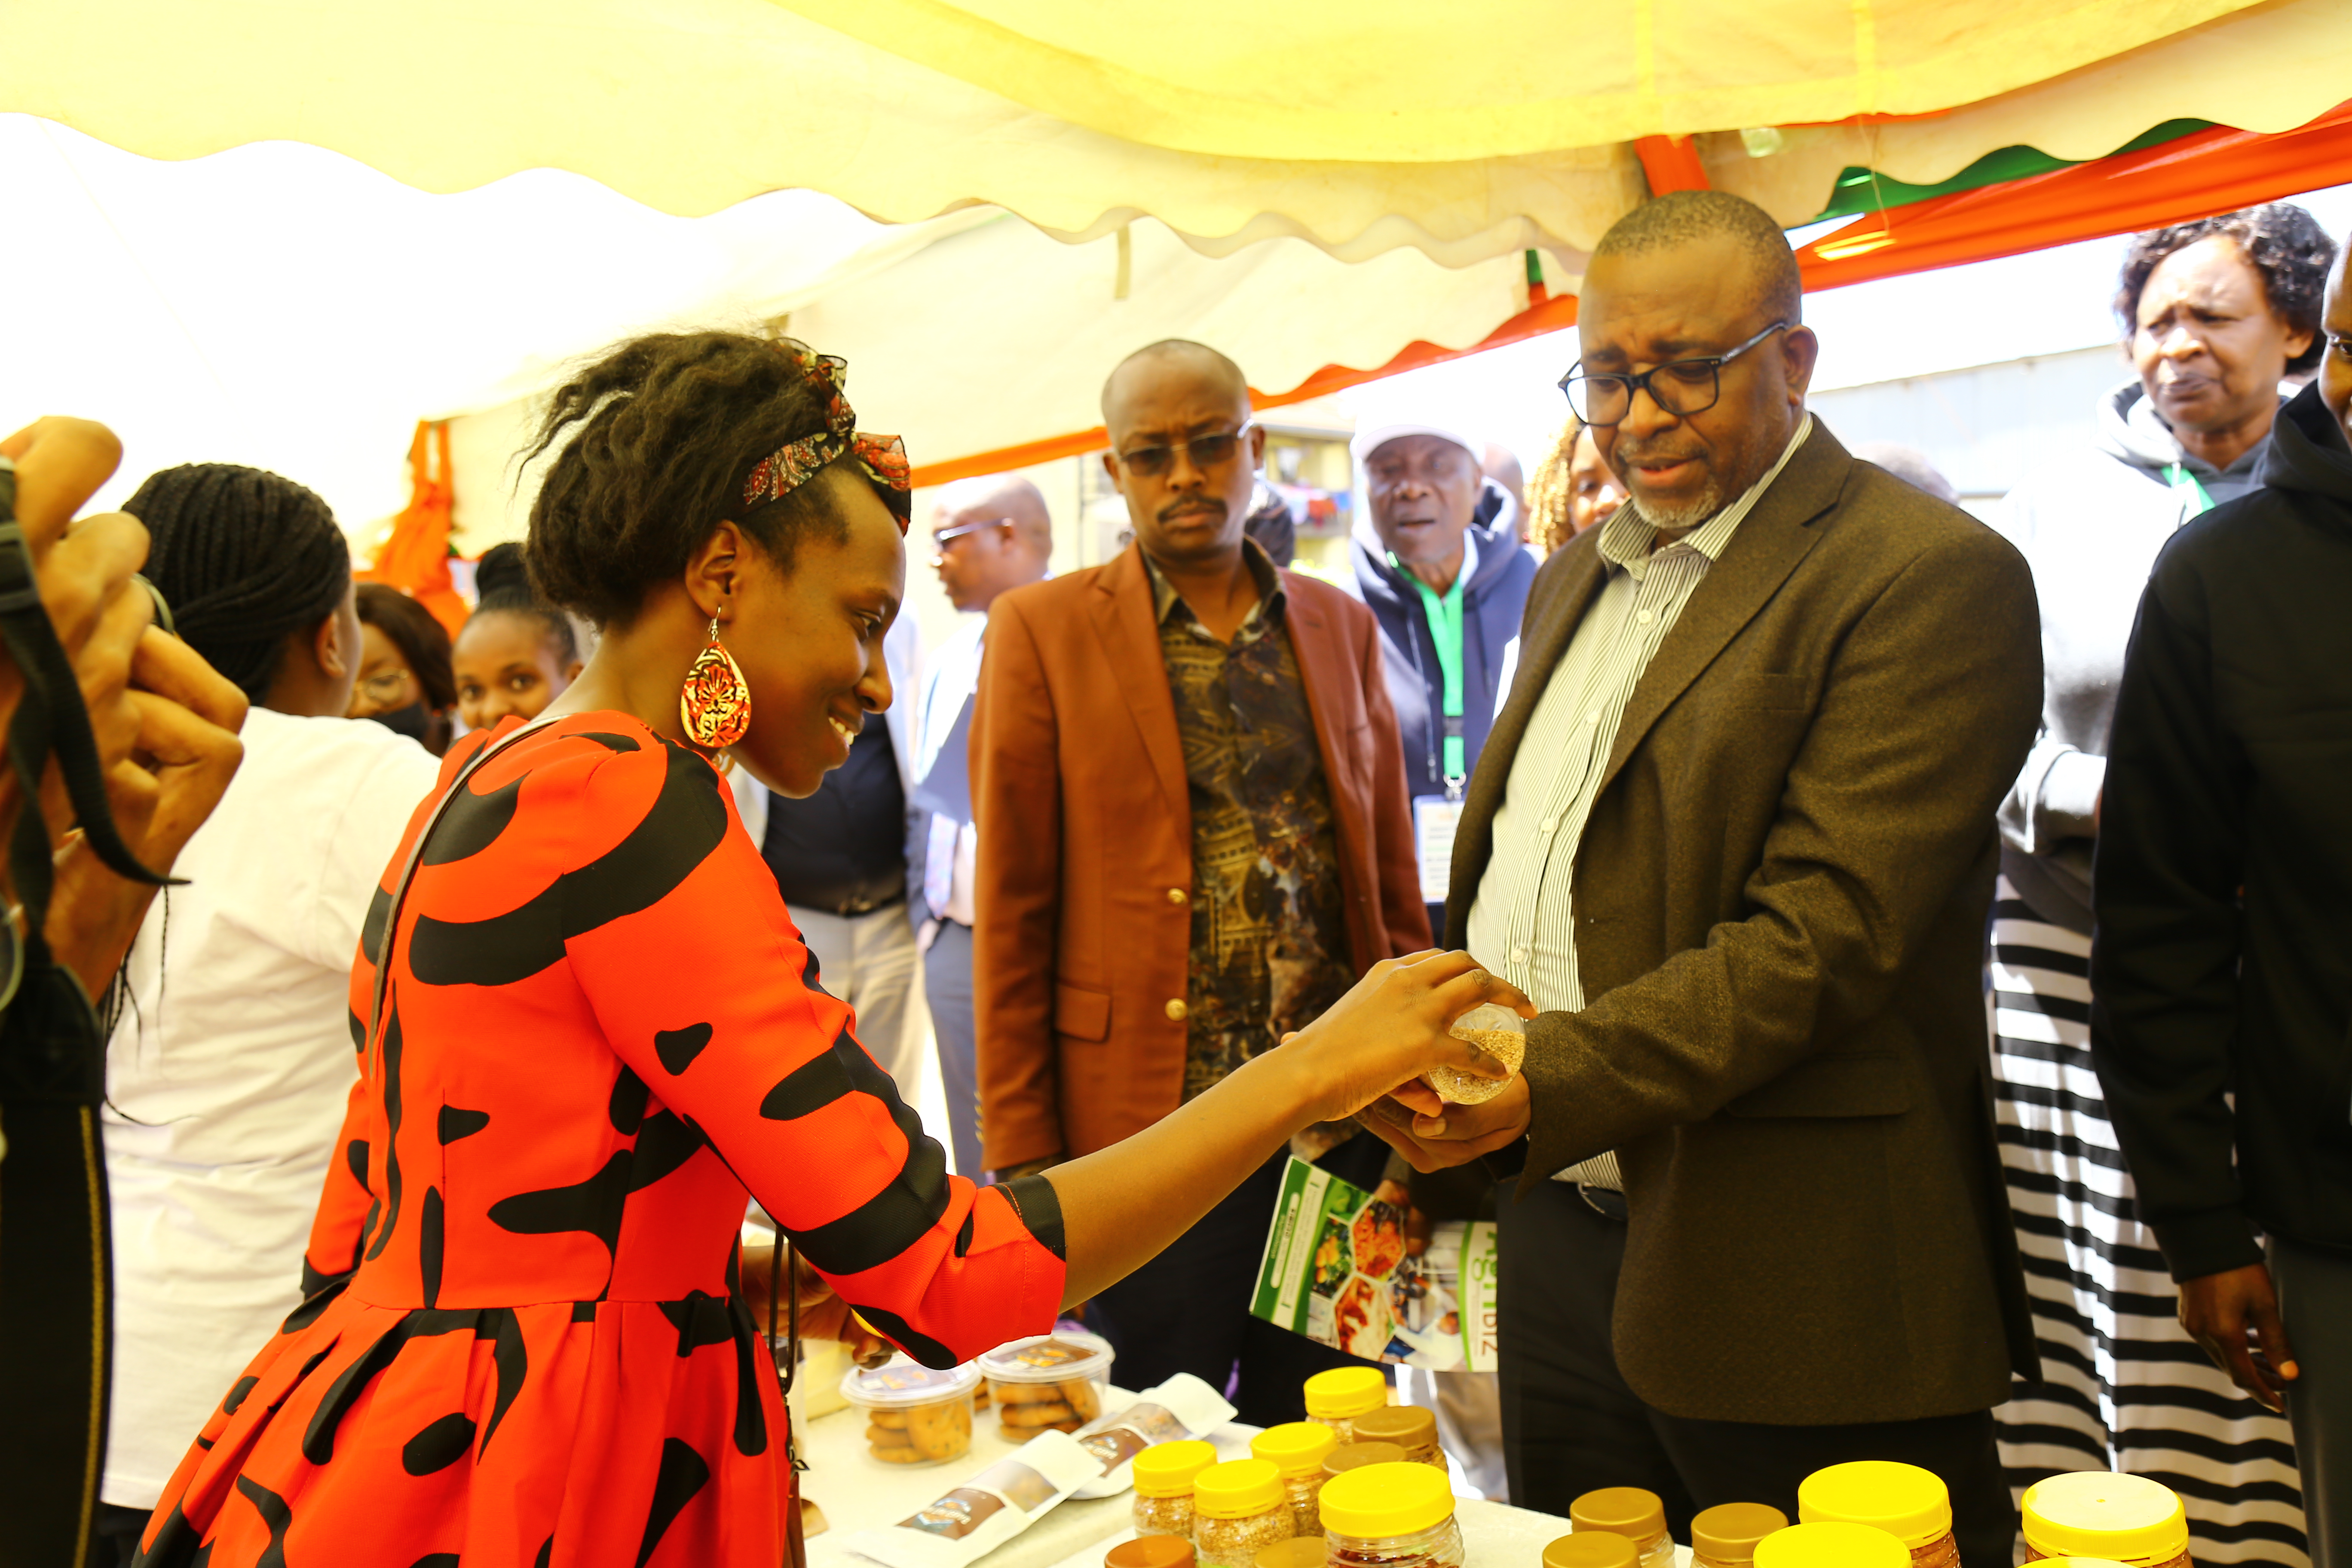 Hon. Mithika Linturi, Cabinet Secretary, Ministry of Agriculture & Livestock Development, visits the exhibition stand of our Affiliate members at the FCC on December 2, 2022.